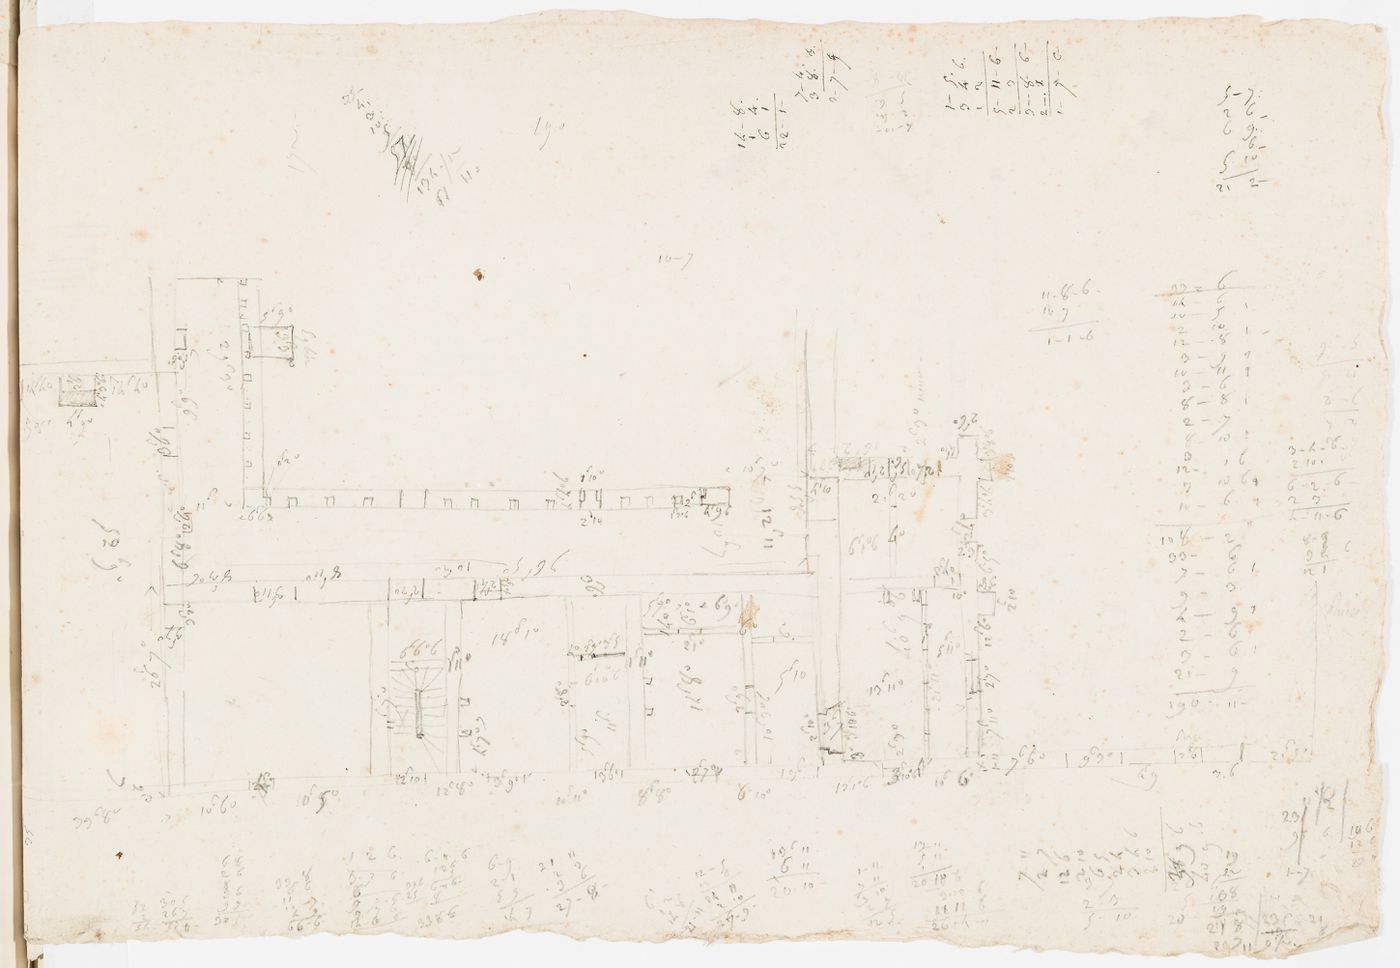 Sketch plan and dimensioning of the ground floor of the house, Domaine de La Vallée; verso: Sketch elevation, perhaps for the entrance stairs for the house, Domaine de La Vallée